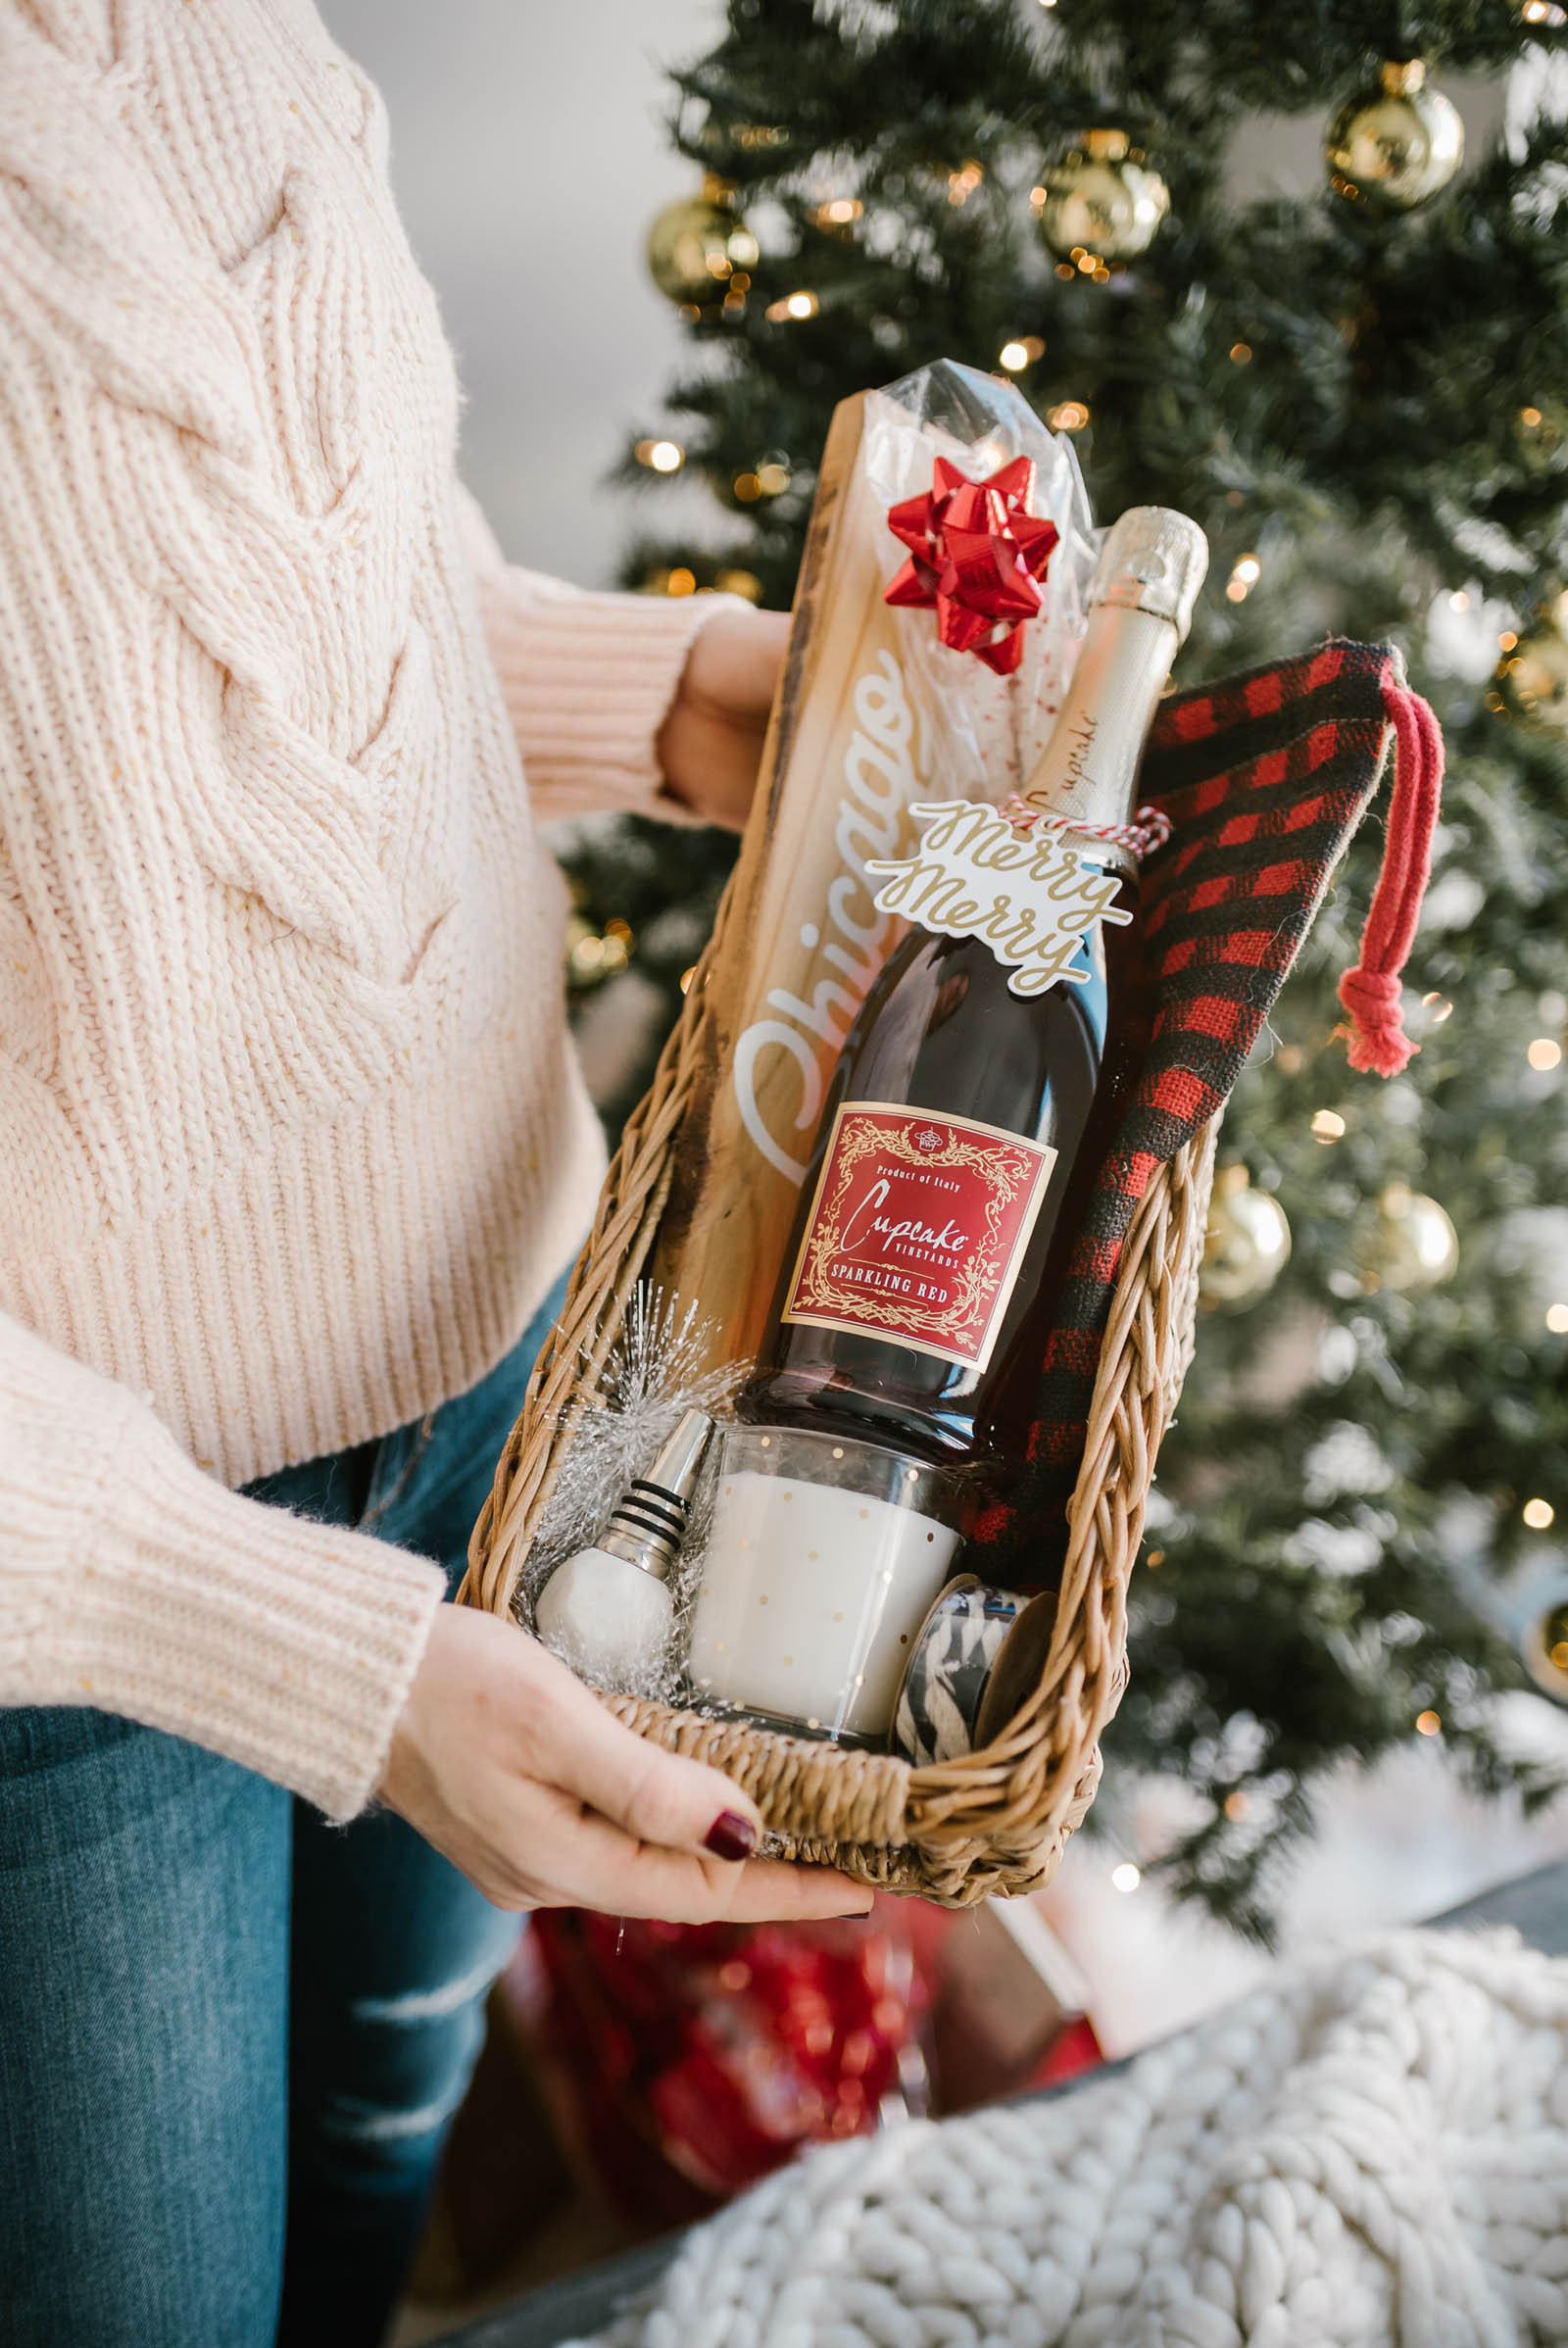 Wine Basket Gift Ideas
 Last Minute Holiday Idea Easy Homemade Gift Baskets